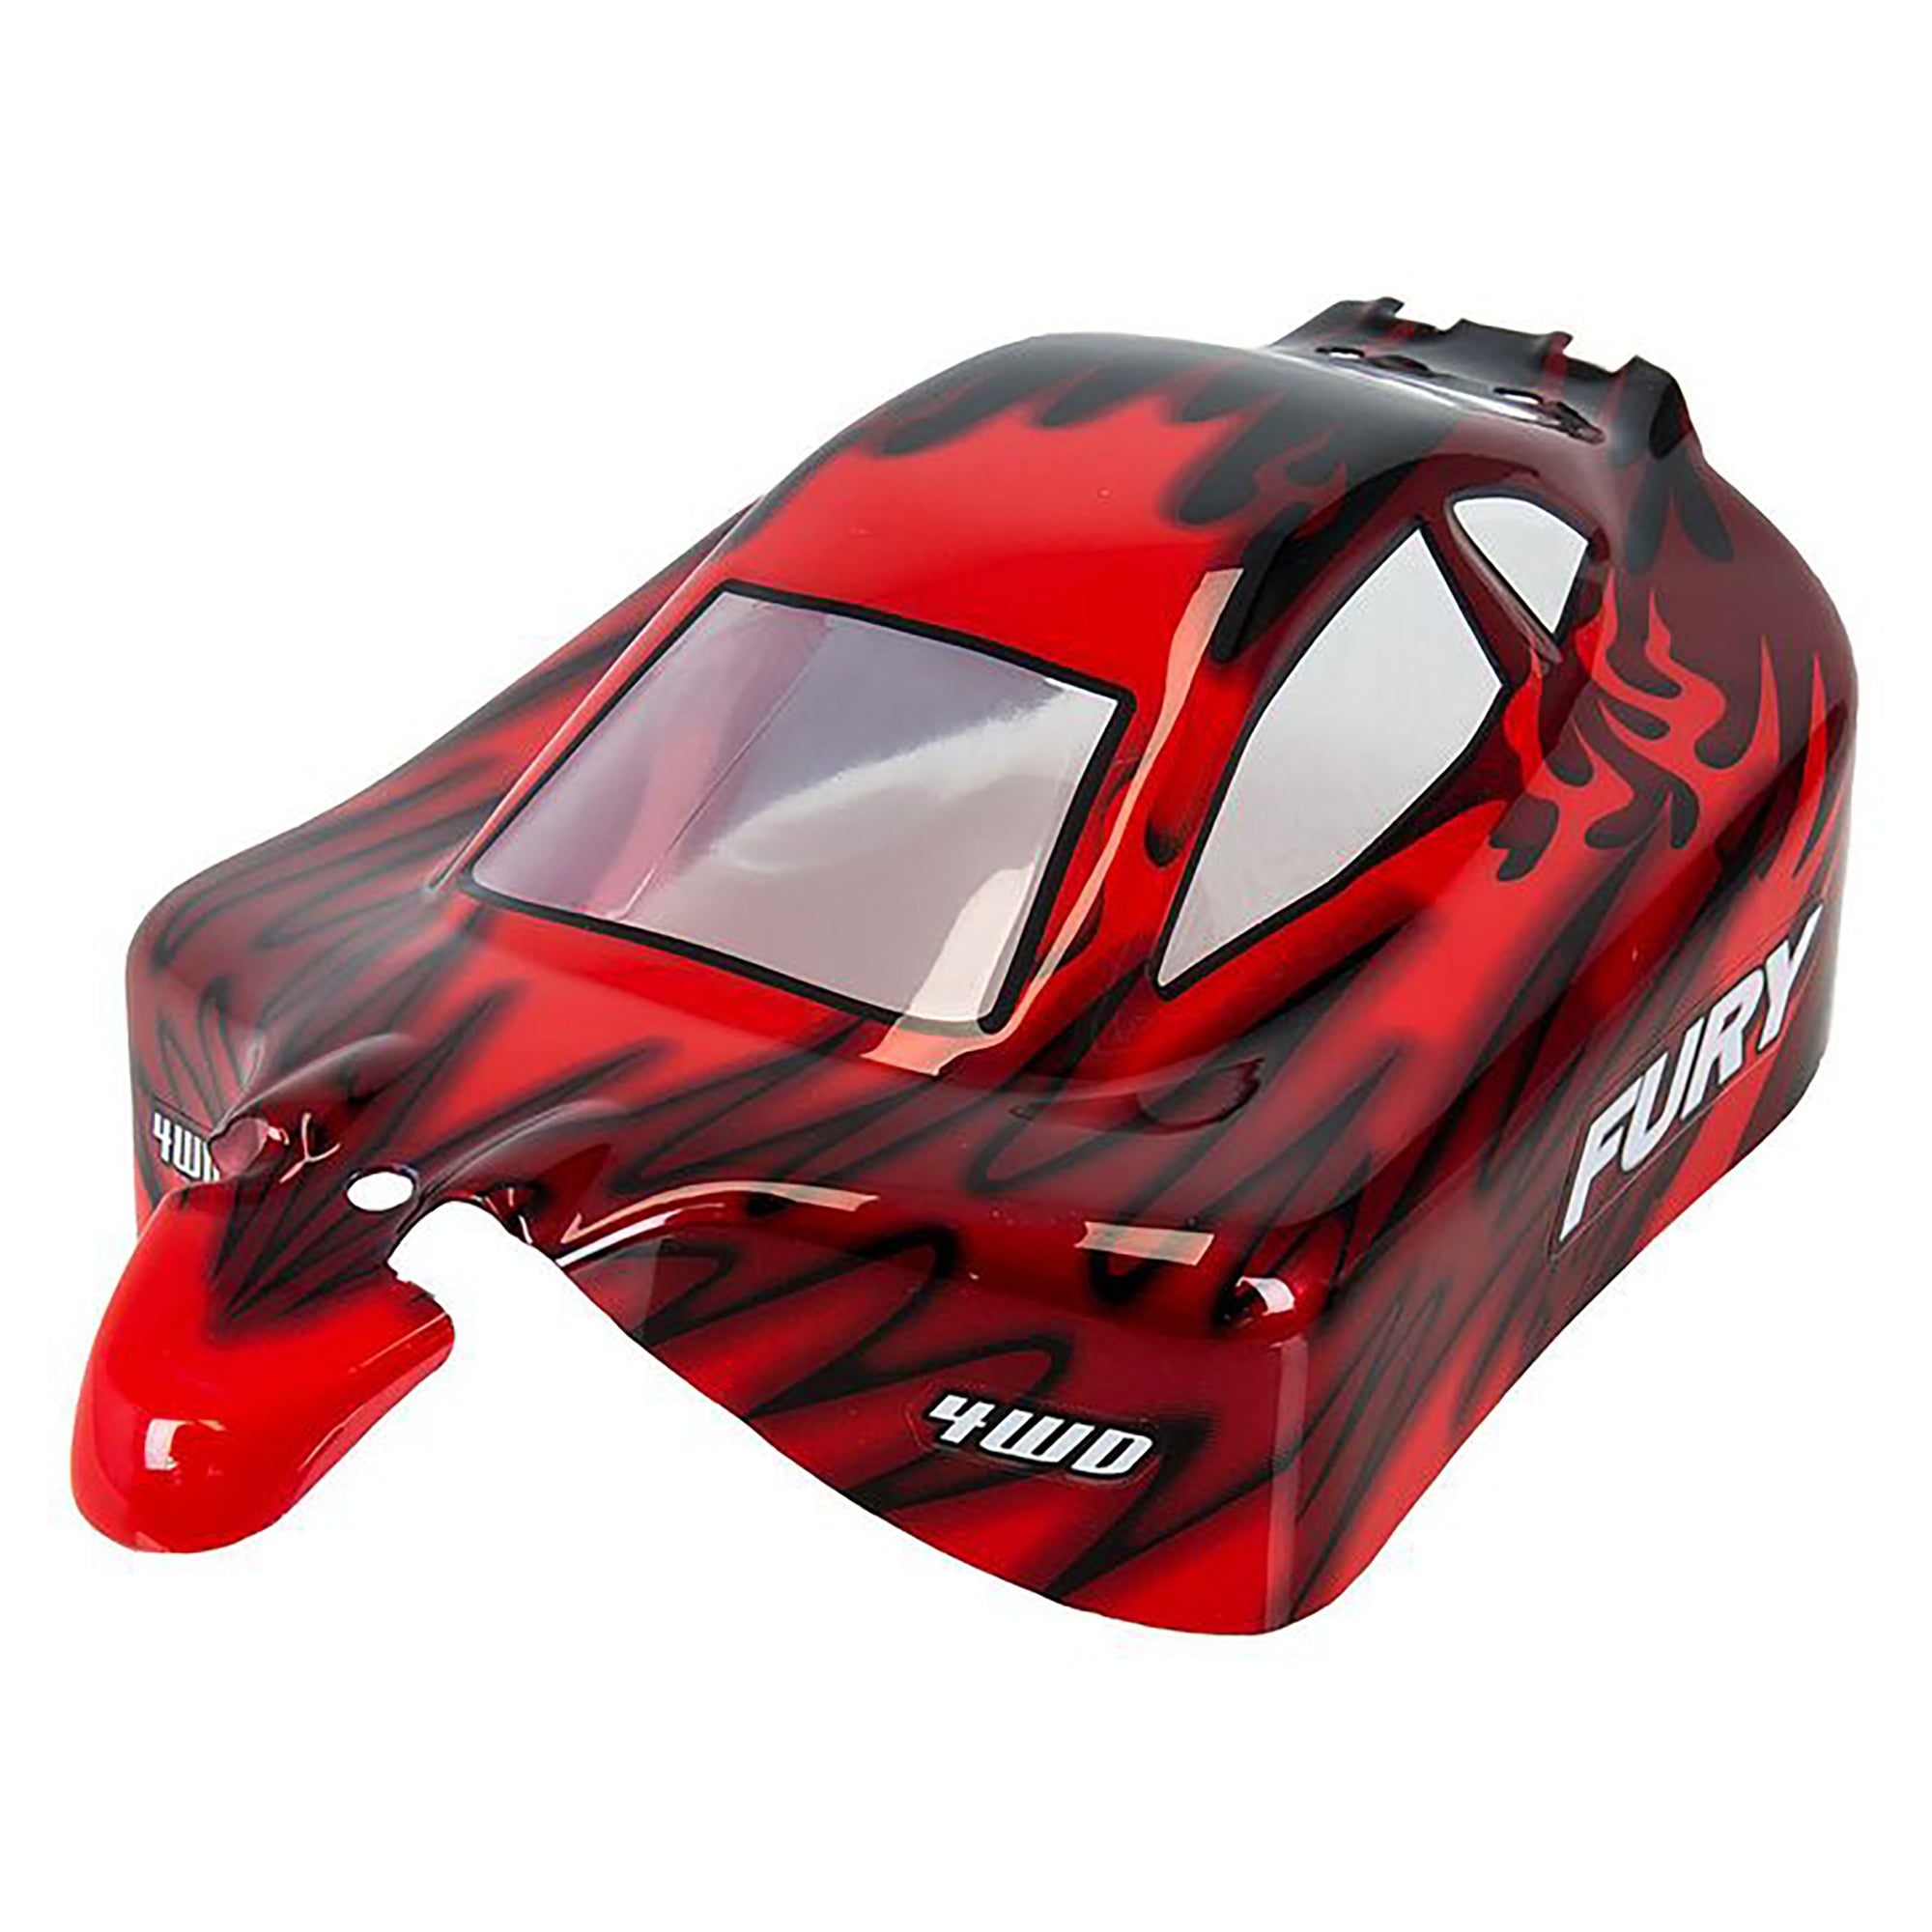 HSP Racing 88802 1/10 Fury Buggy Body Cover